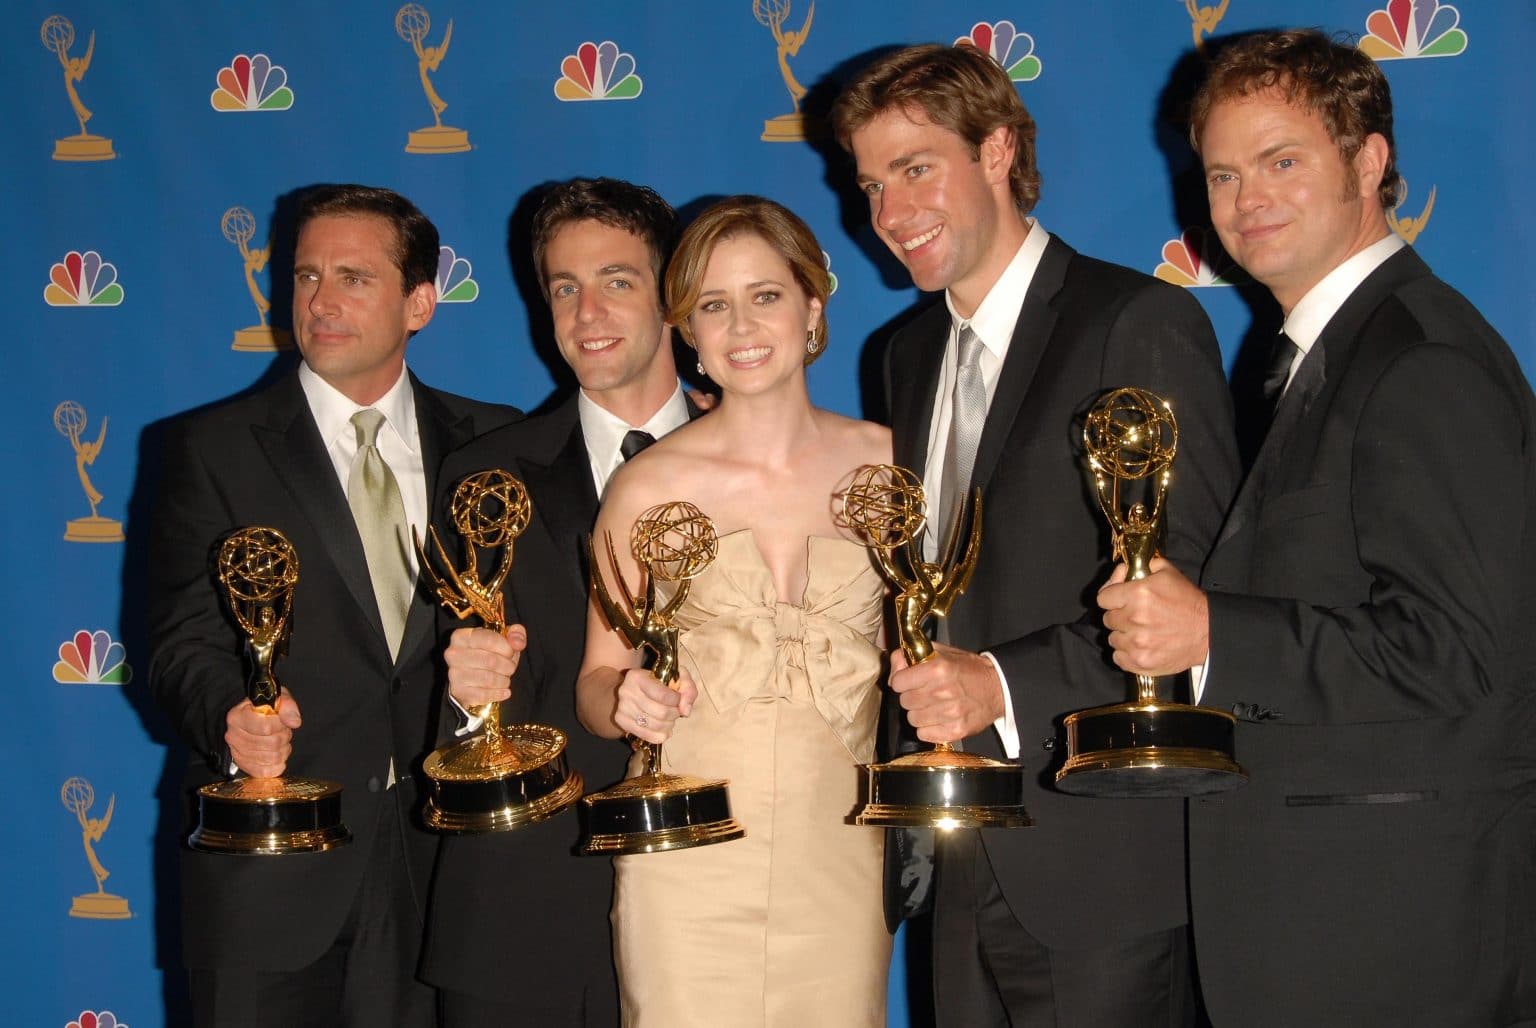 Cast of "The Office" holding their Emmy Awards